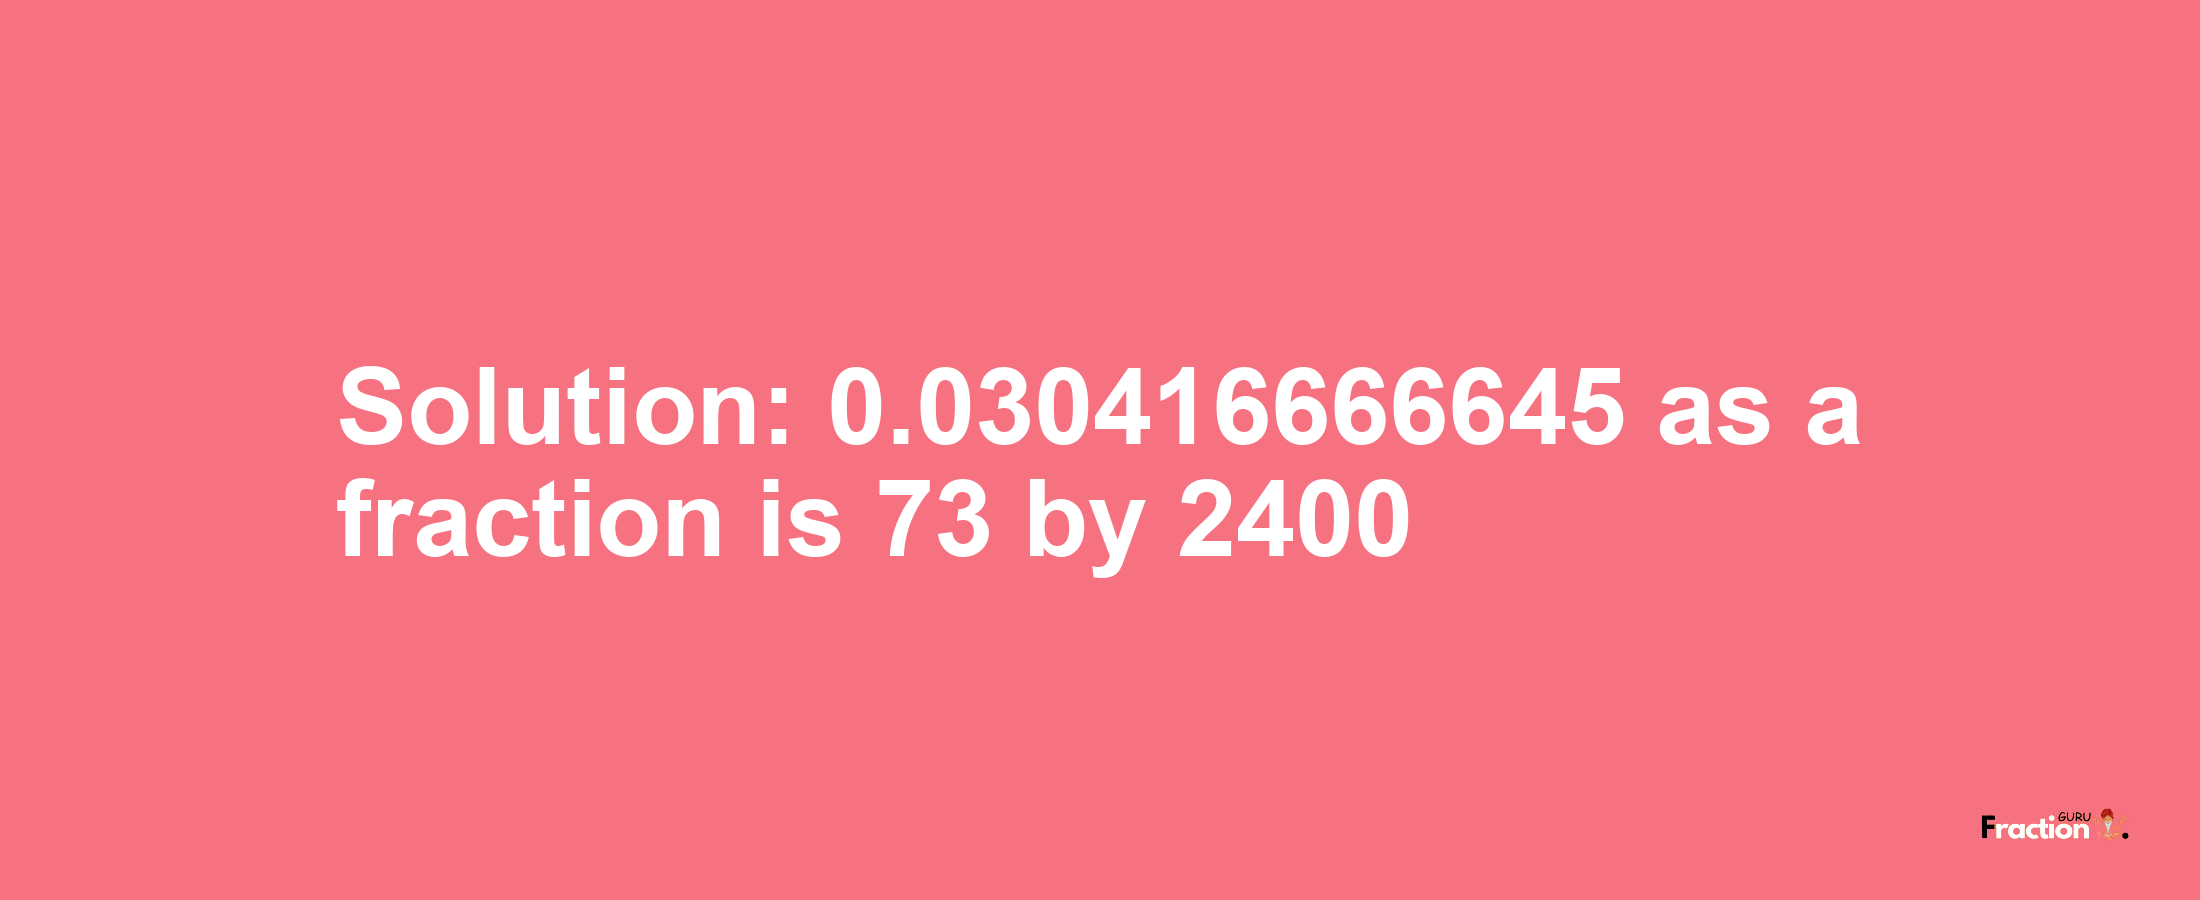 Solution:0.030416666645 as a fraction is 73/2400